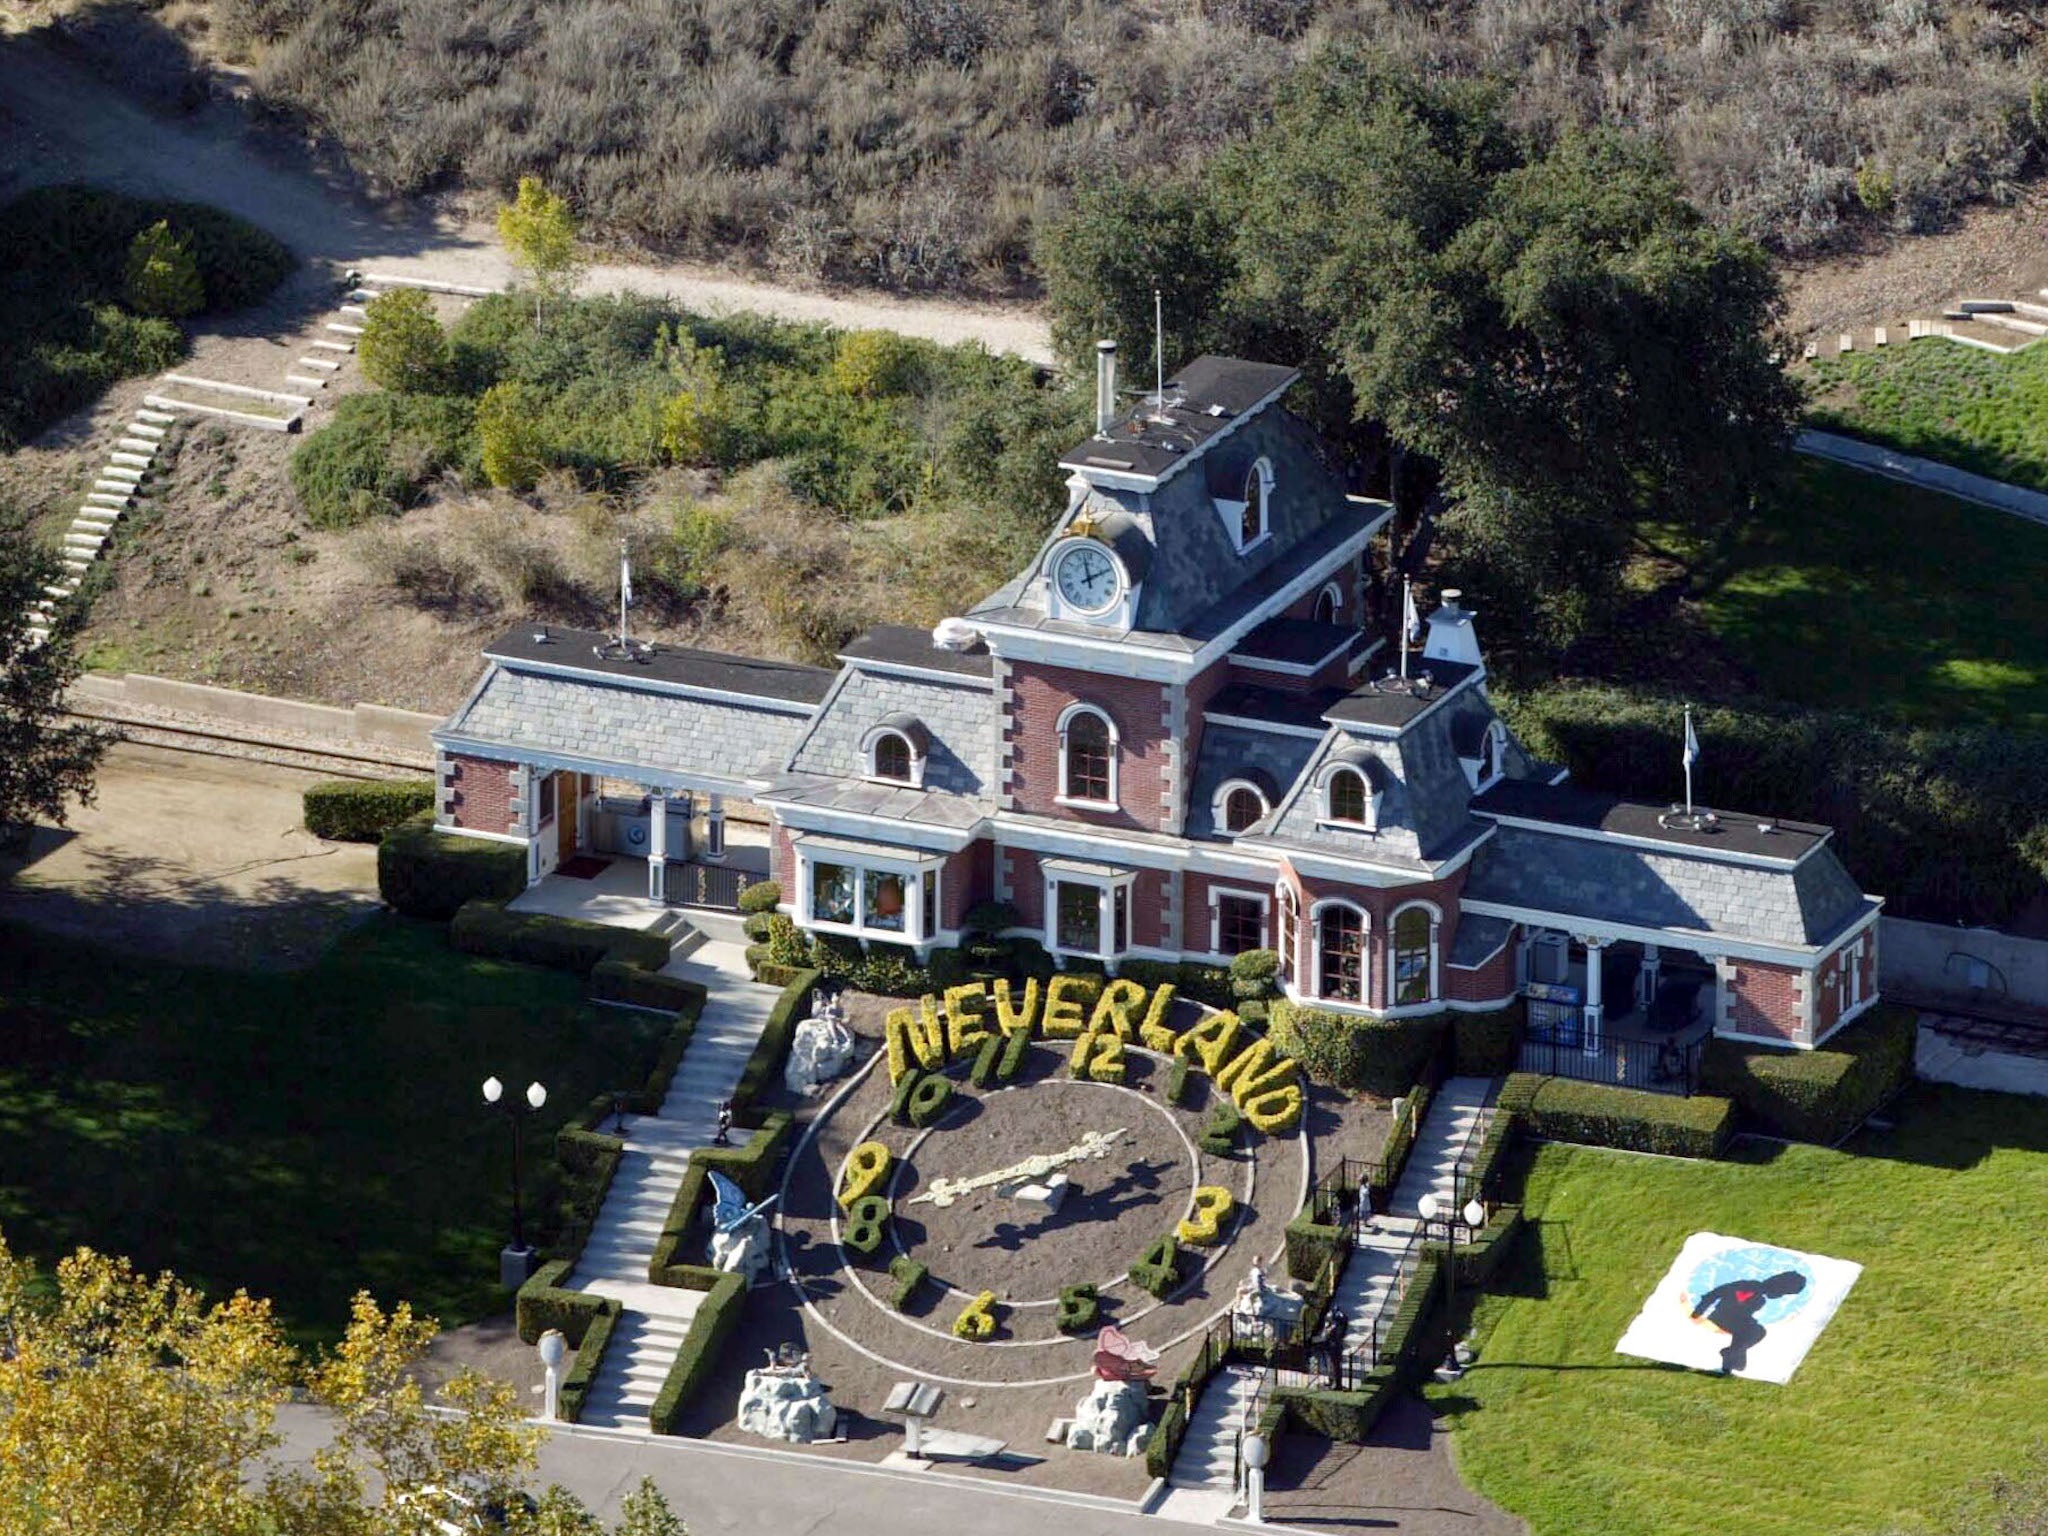 The ups and down of Neverland Ranch in California mirrored owner Michael Jackson’s rollercoaster life